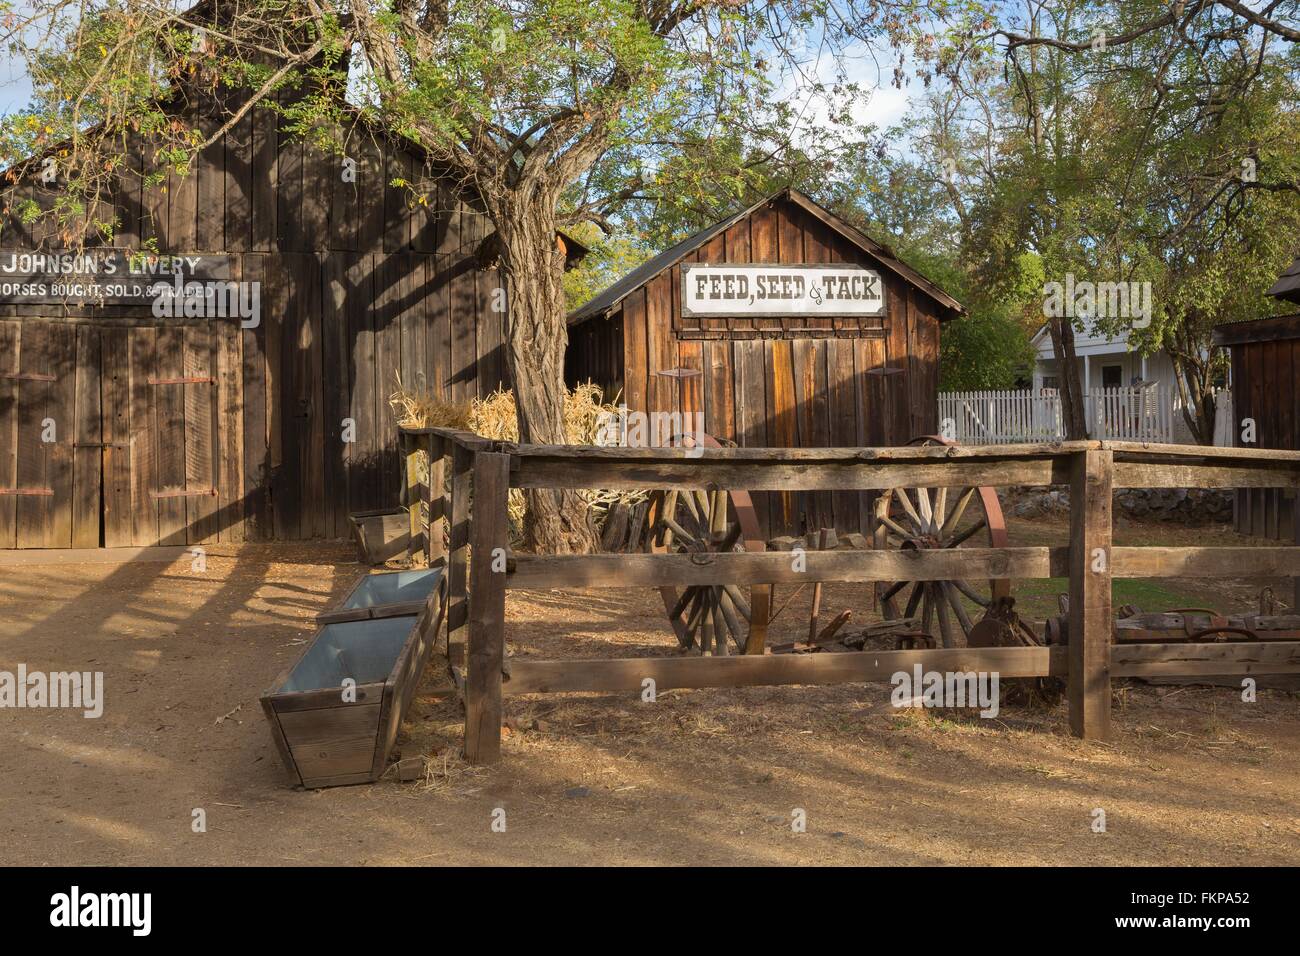 Livery Stable, Columbia State Historic Park, California Stock Photo